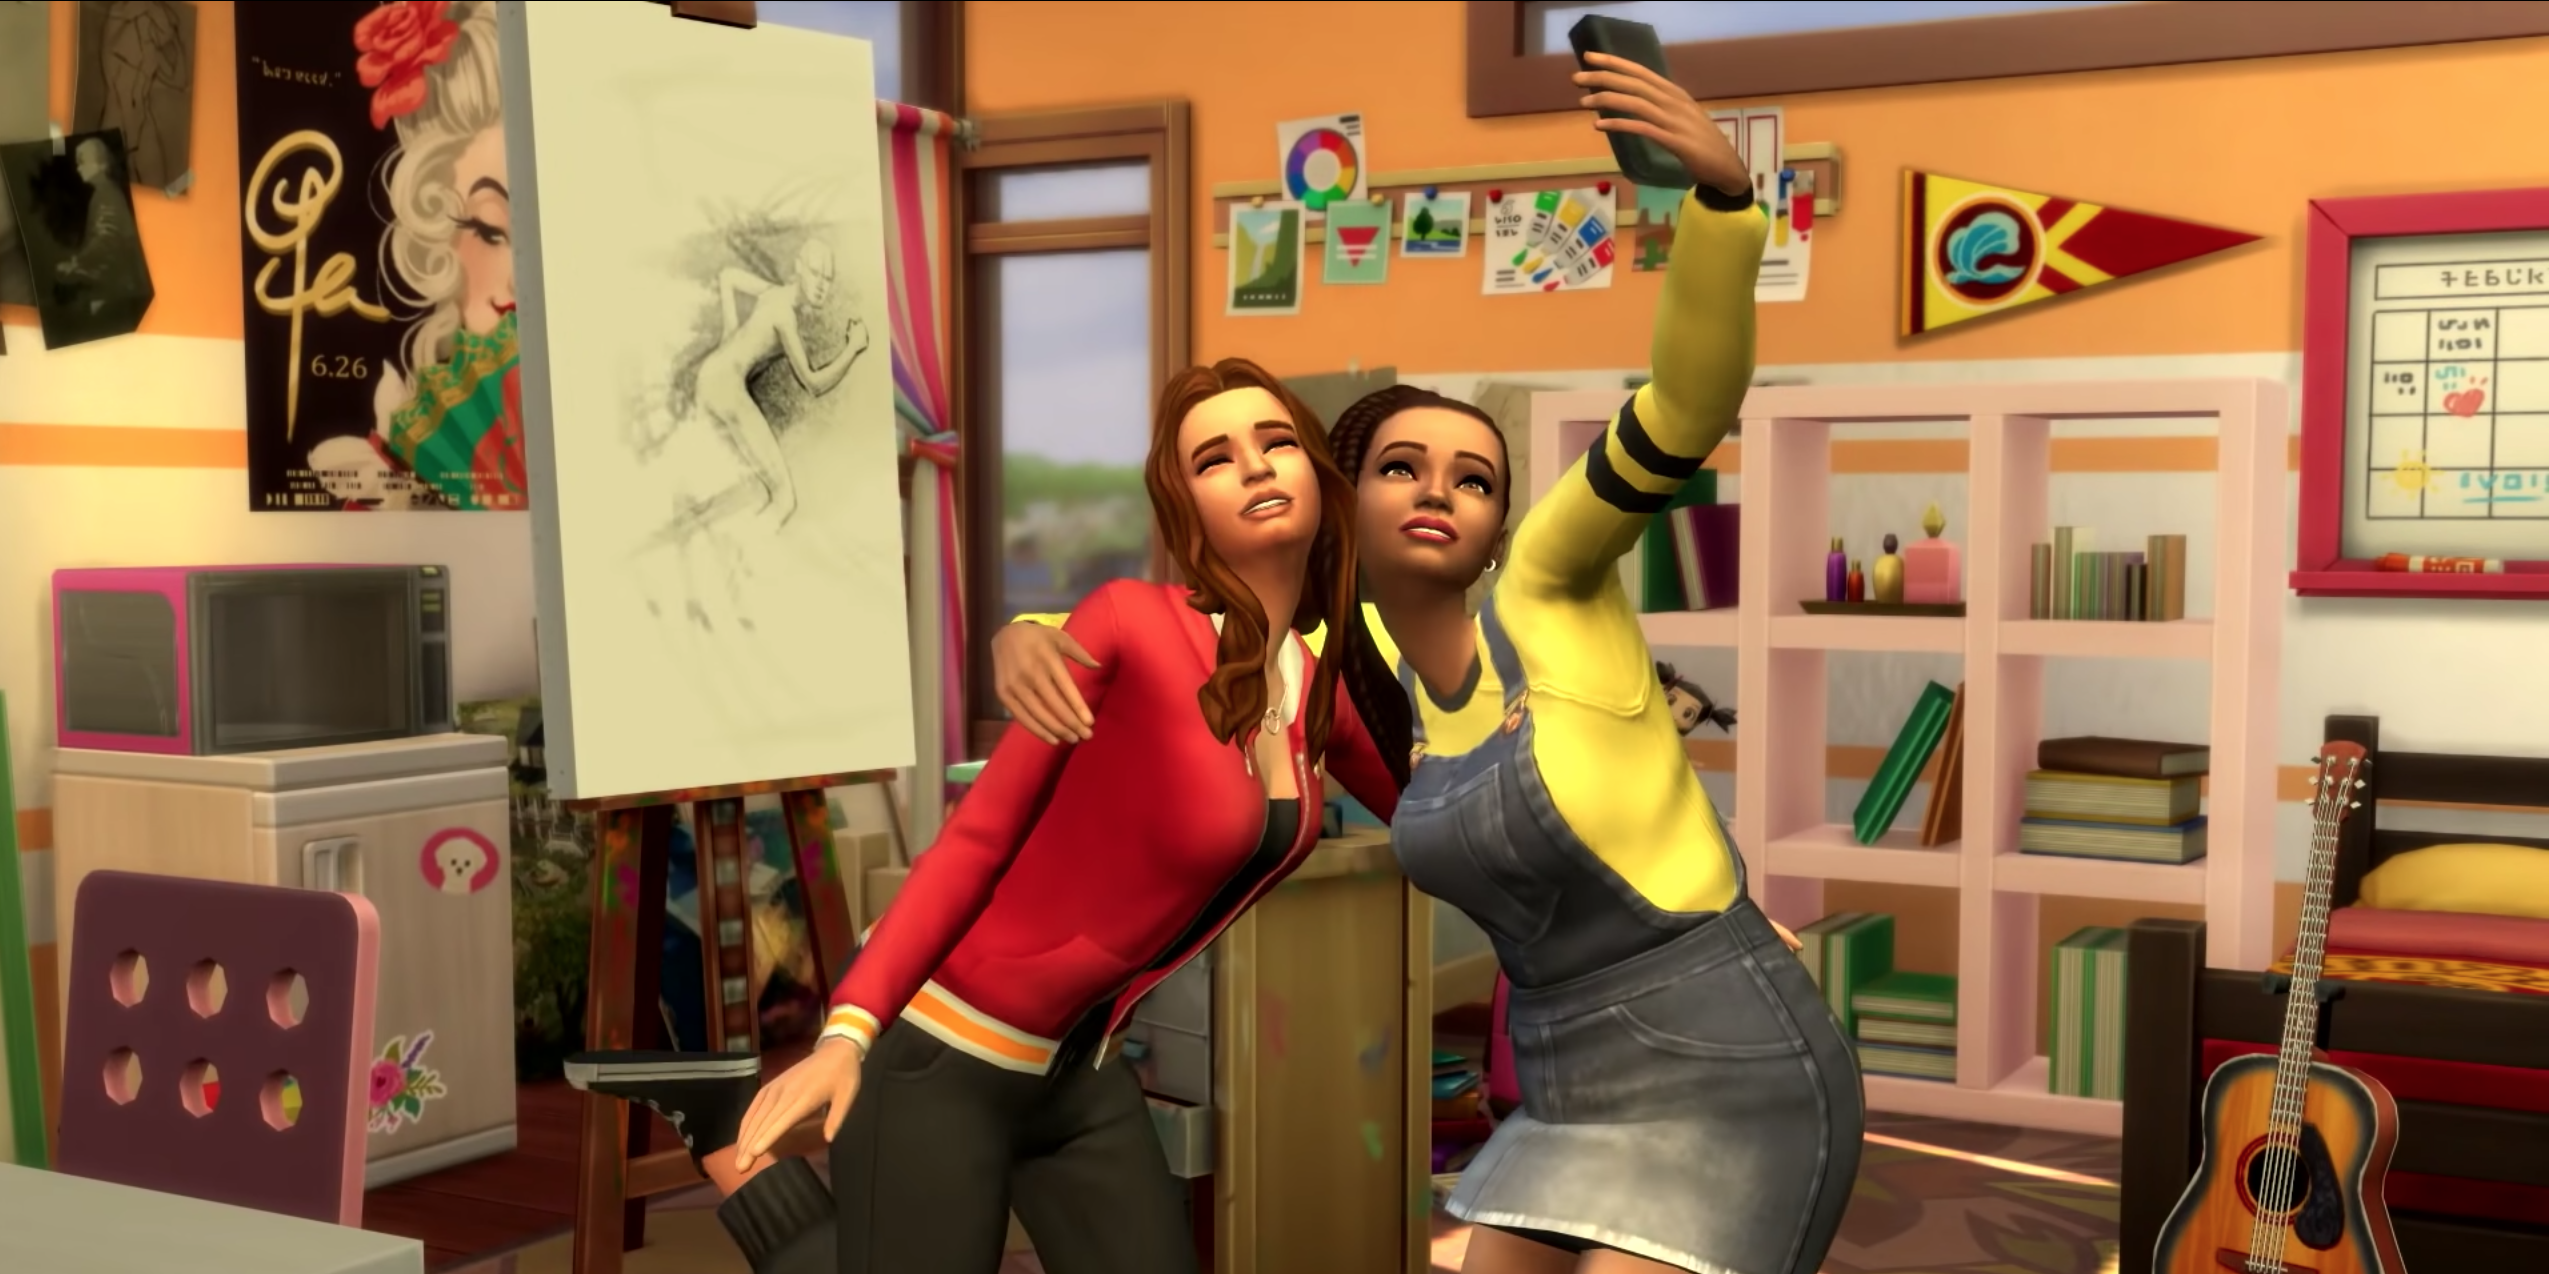 Foxberry Dormmates take a selfie together in their well-decorated dorm. An easel with a half-finished sketch sits in the left corner, while a bookcase and guitar occupy the right